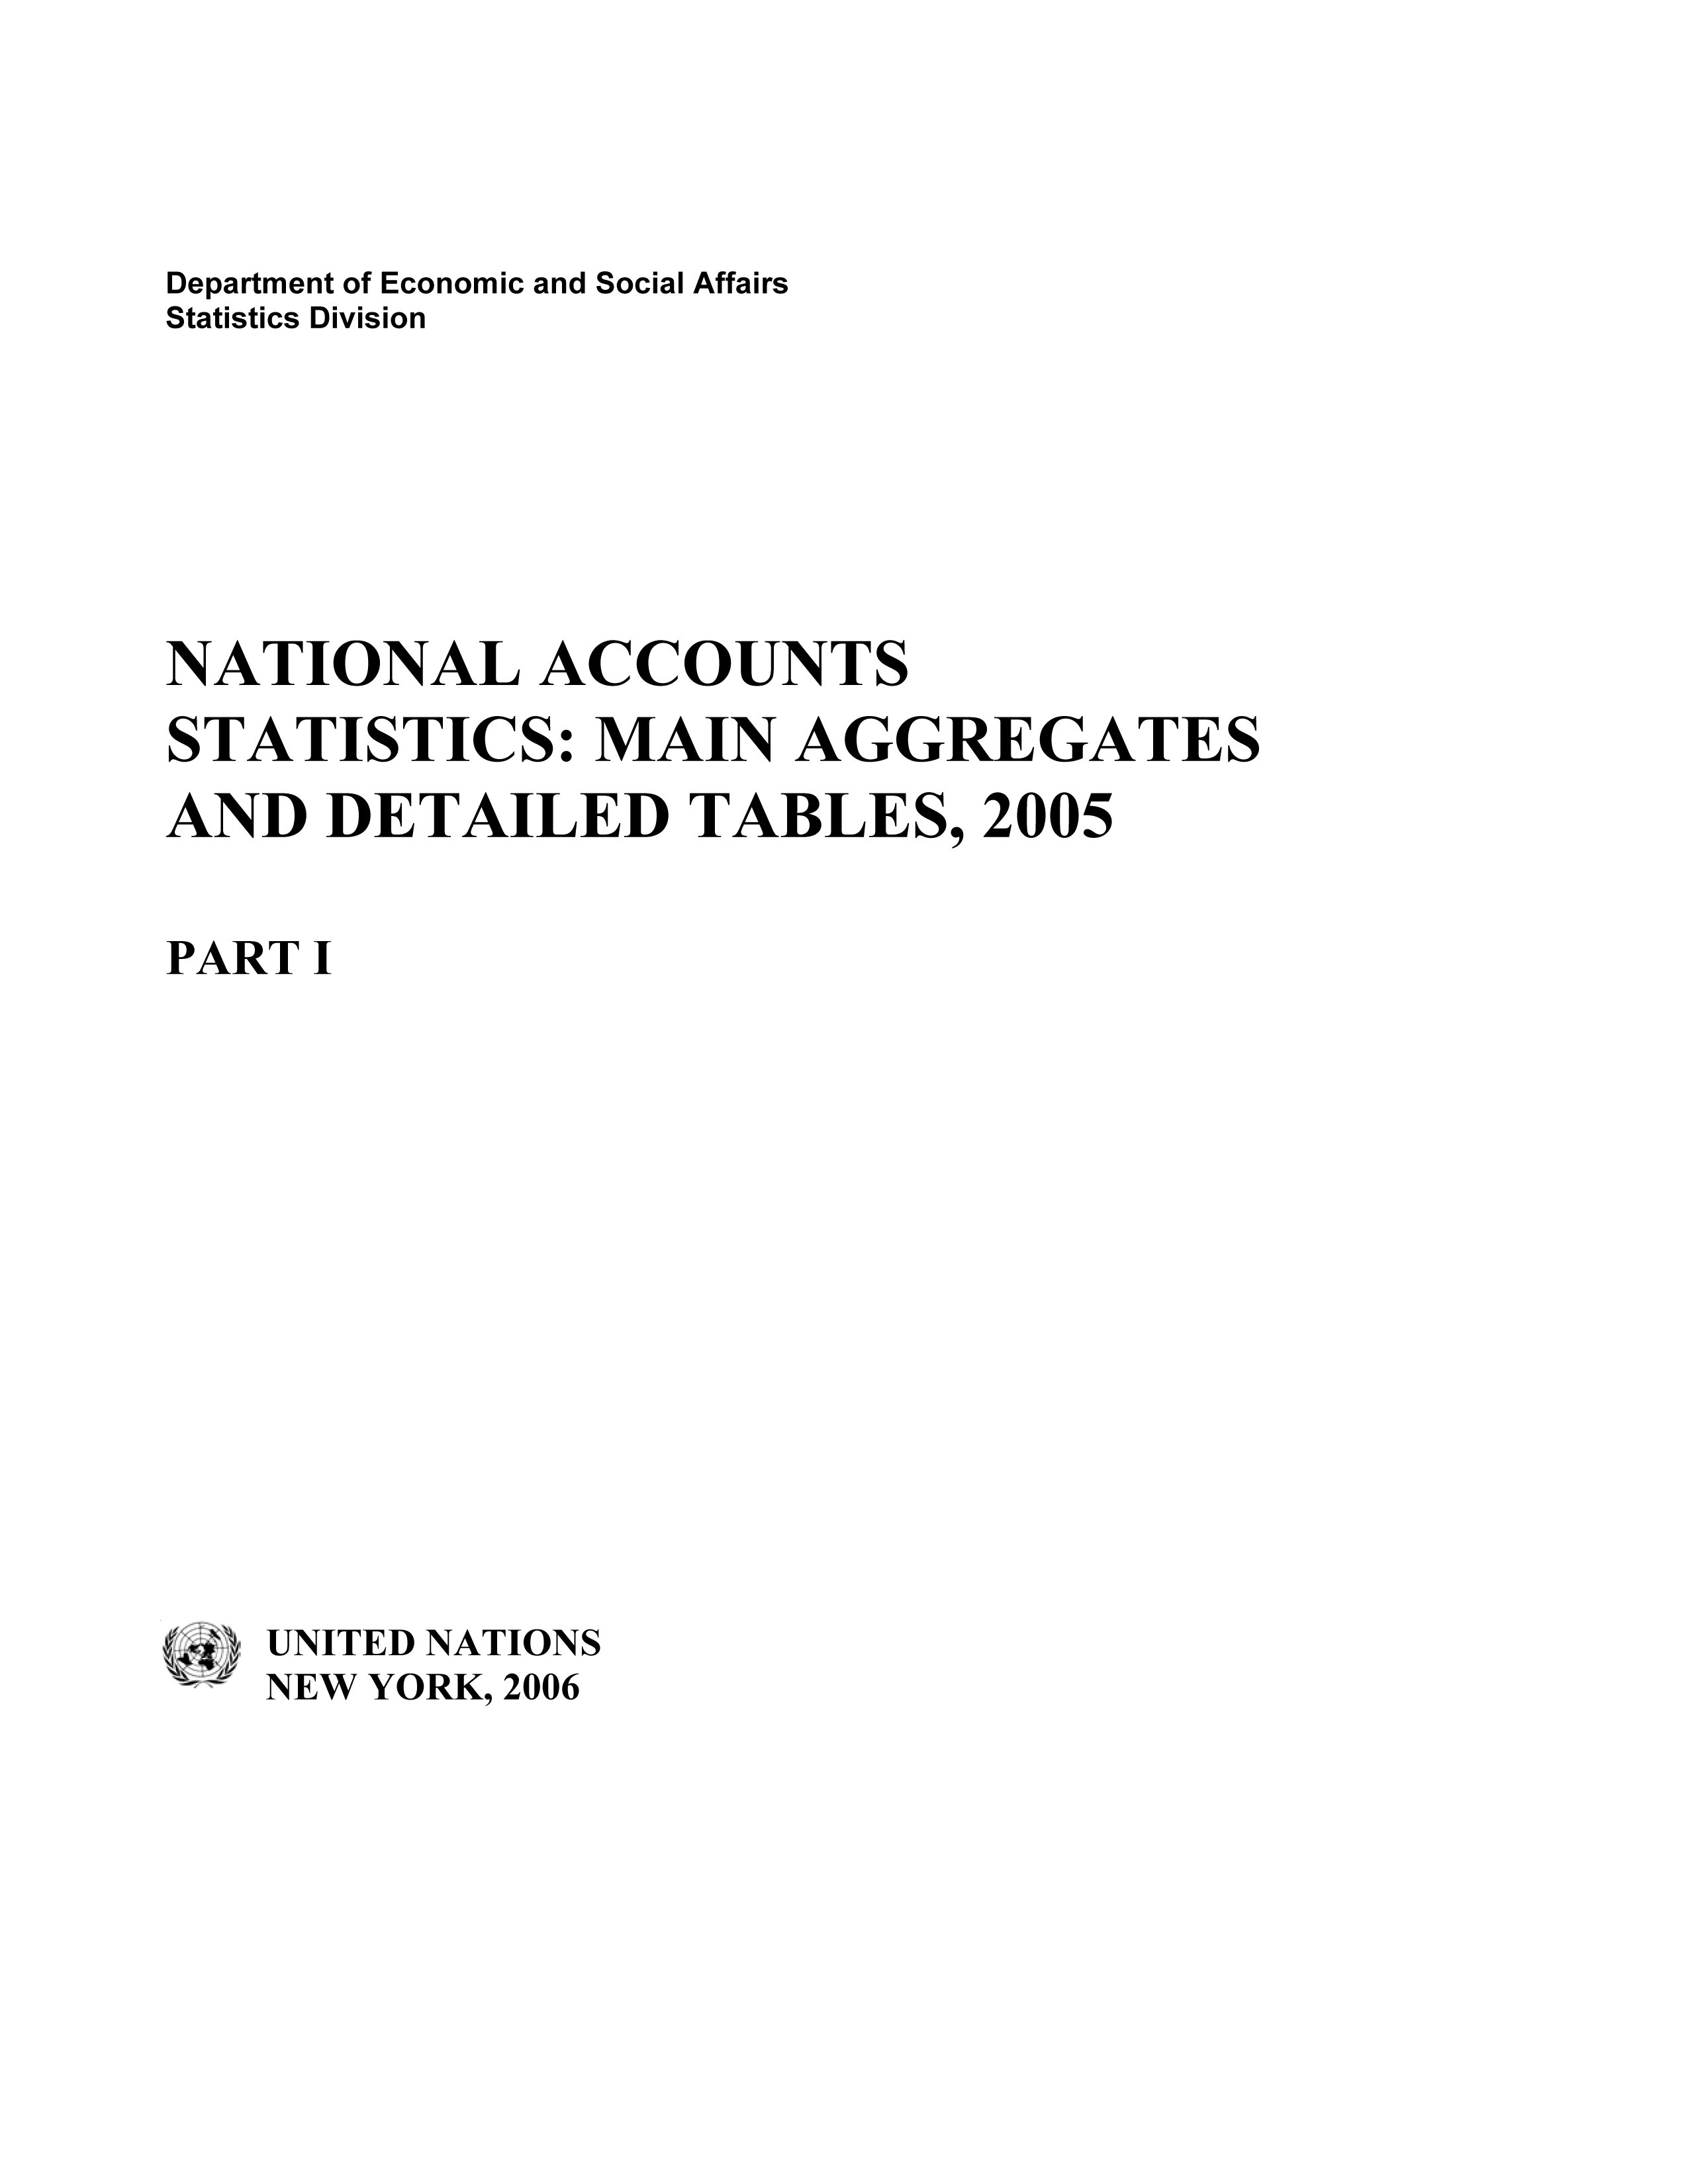 image of National Accounts Statistics: Main Aggregates and Detailed Tables 2005